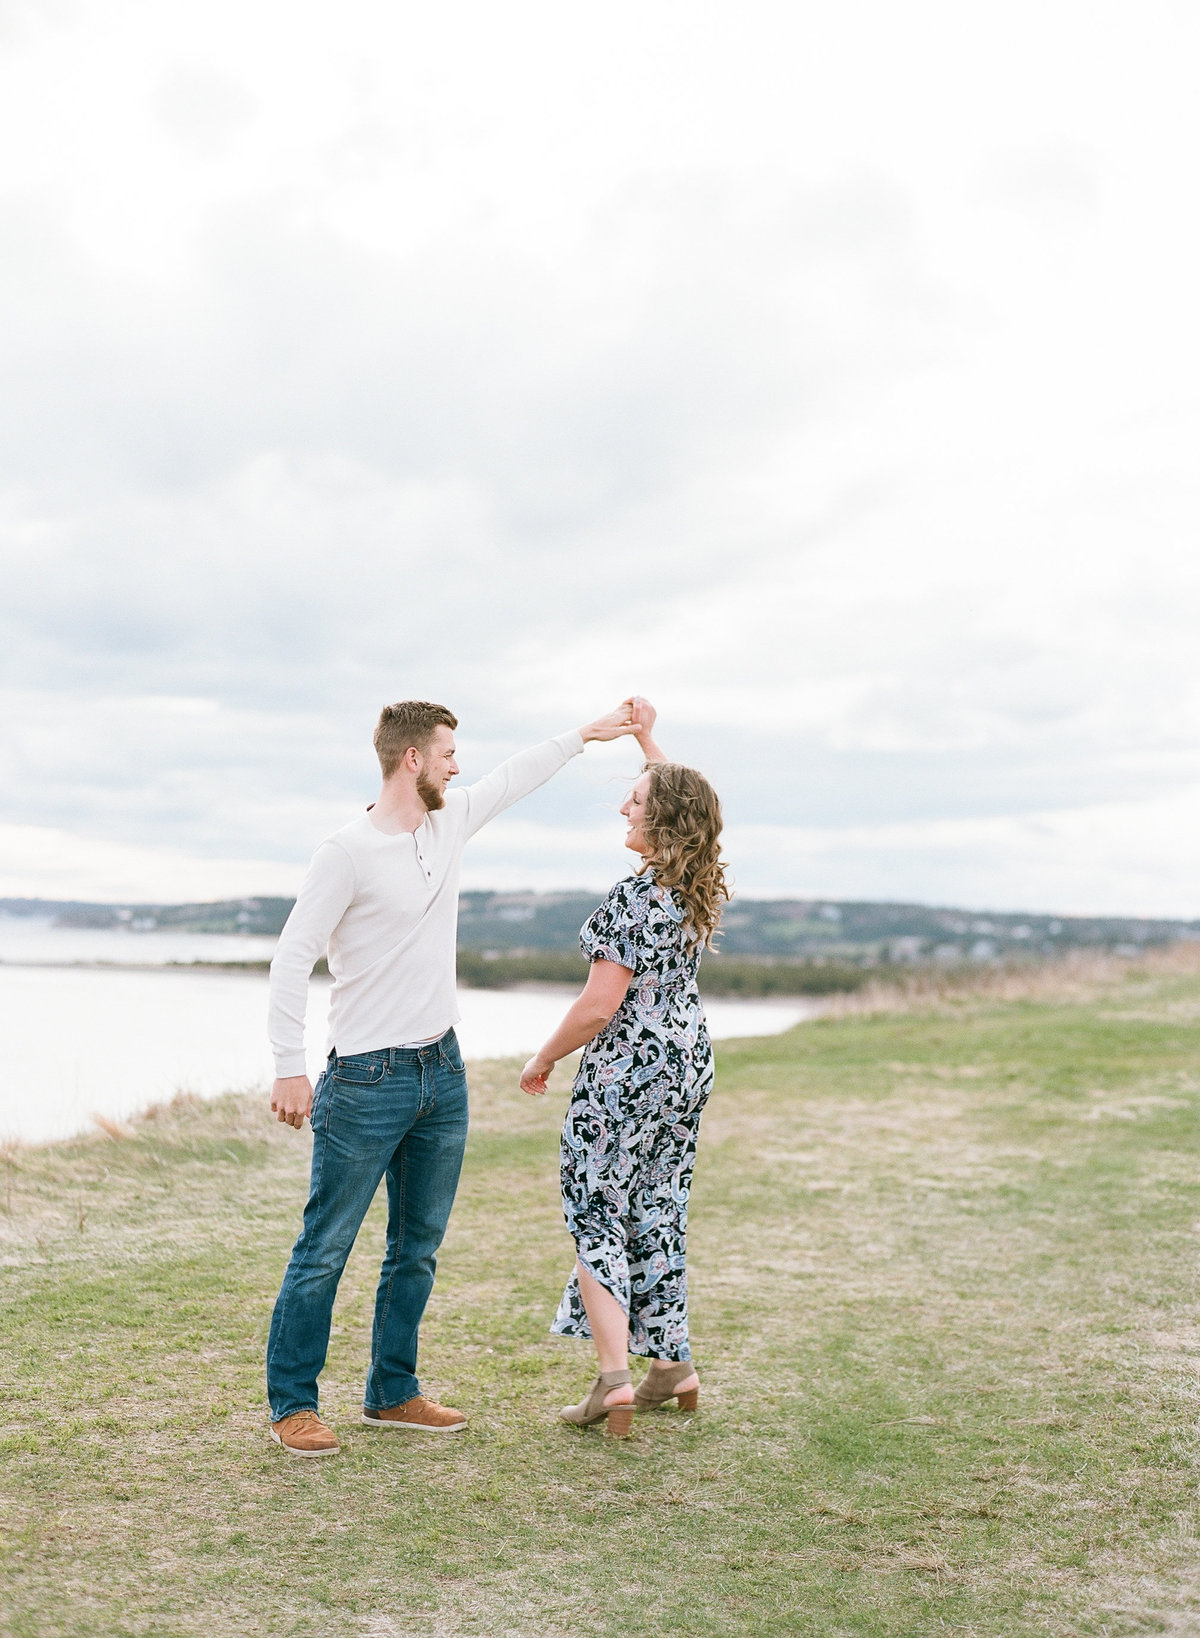 Jacqueline Anne Photography - Akayla and Andrew - Lawrencetown Beach-44